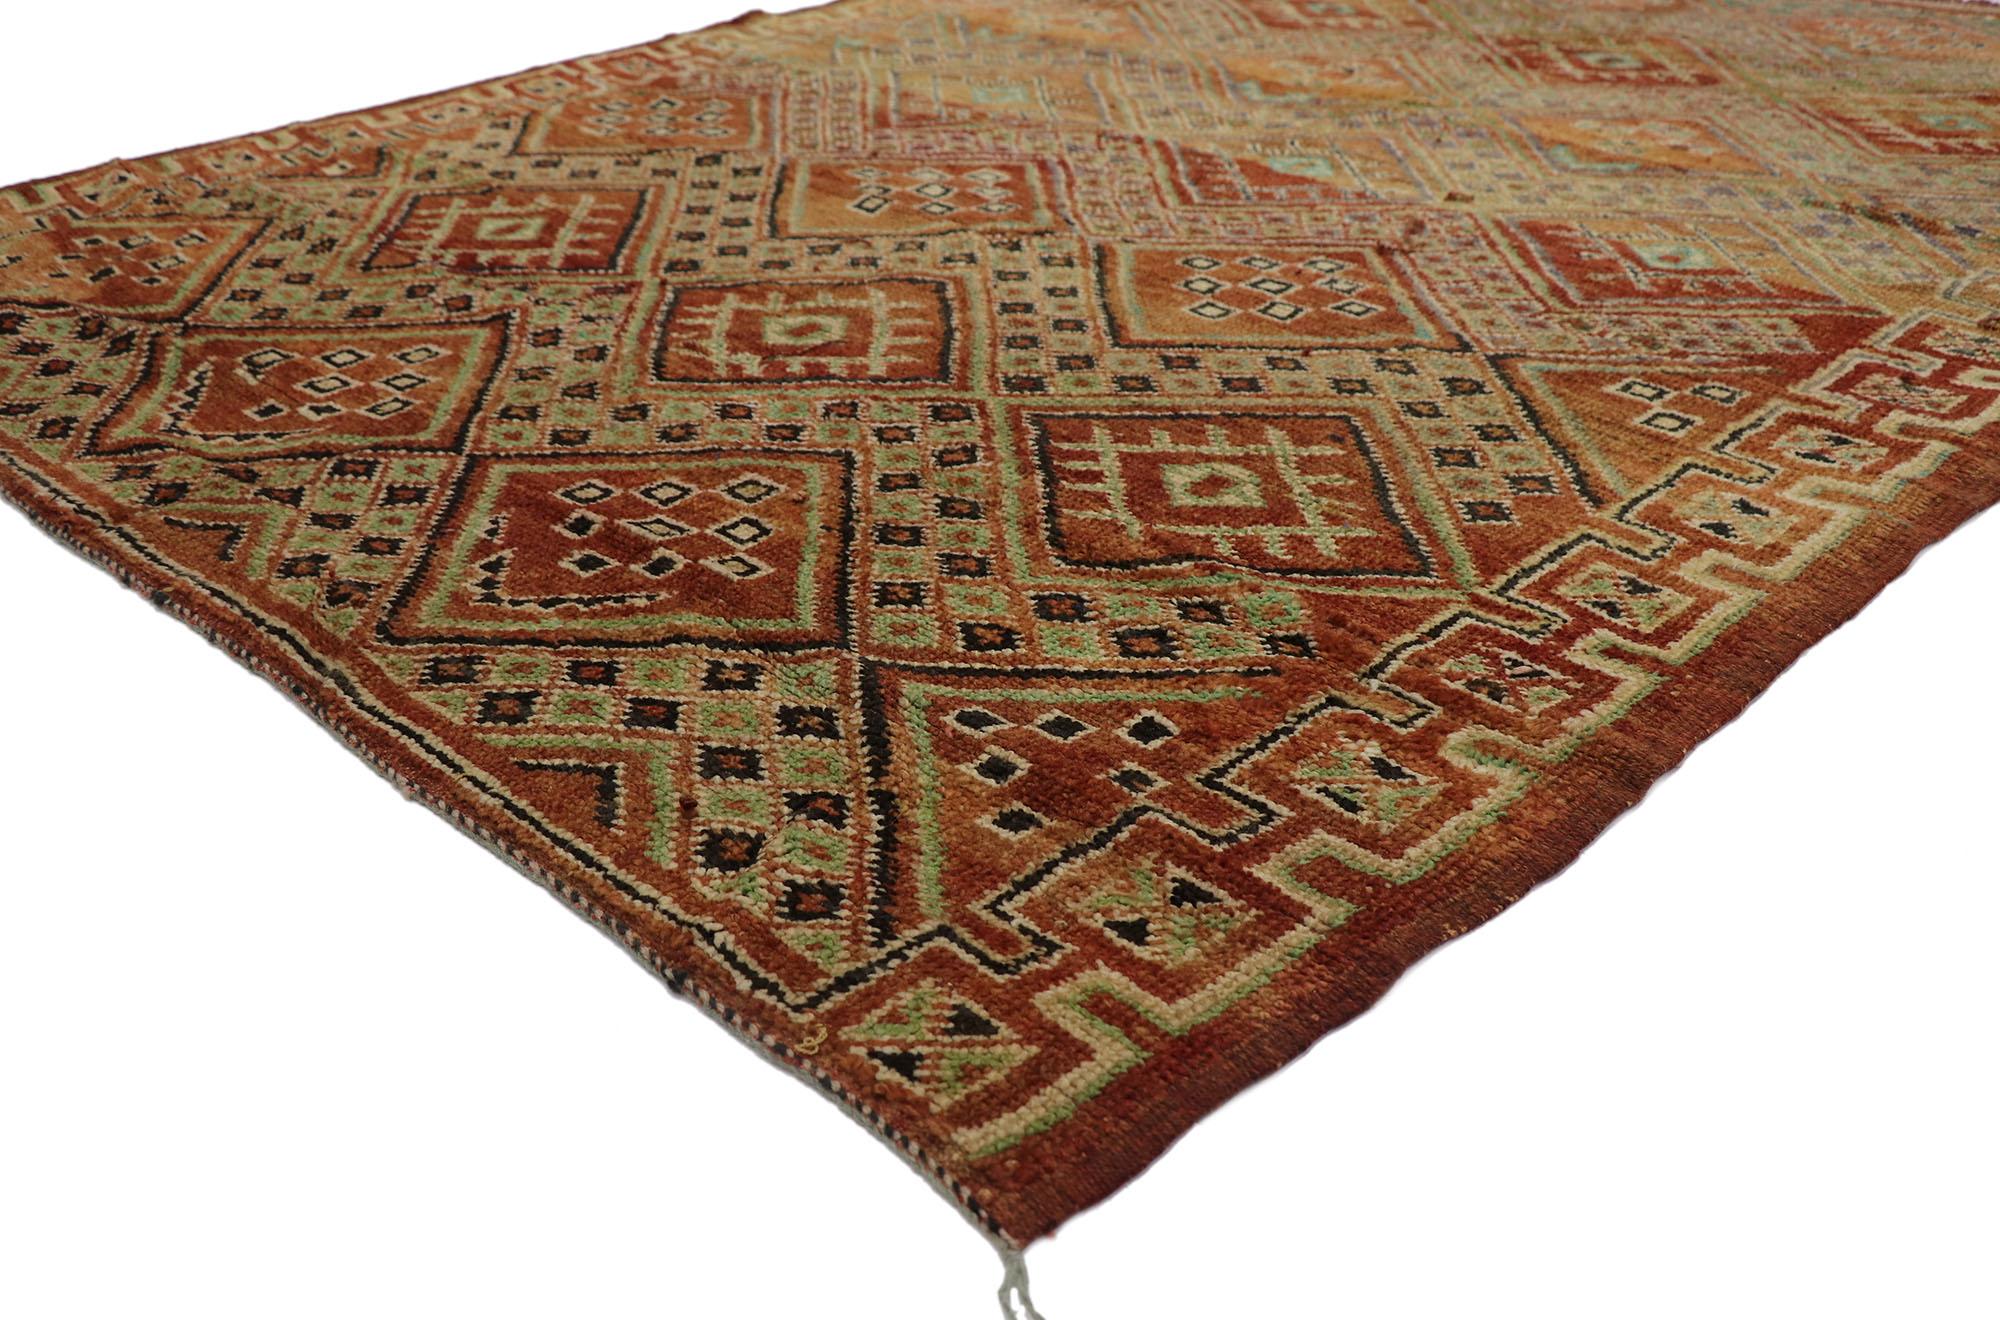 212250 Vintage Berber Moroccan Rug, ​05'10 x 08'01.
Elegant warmth meets nomadic charm in this hand-knotted wool vintage Moroccan rug. The visual complexity and rich earth-tone colors woven into this piece work together to bring forth a sense of